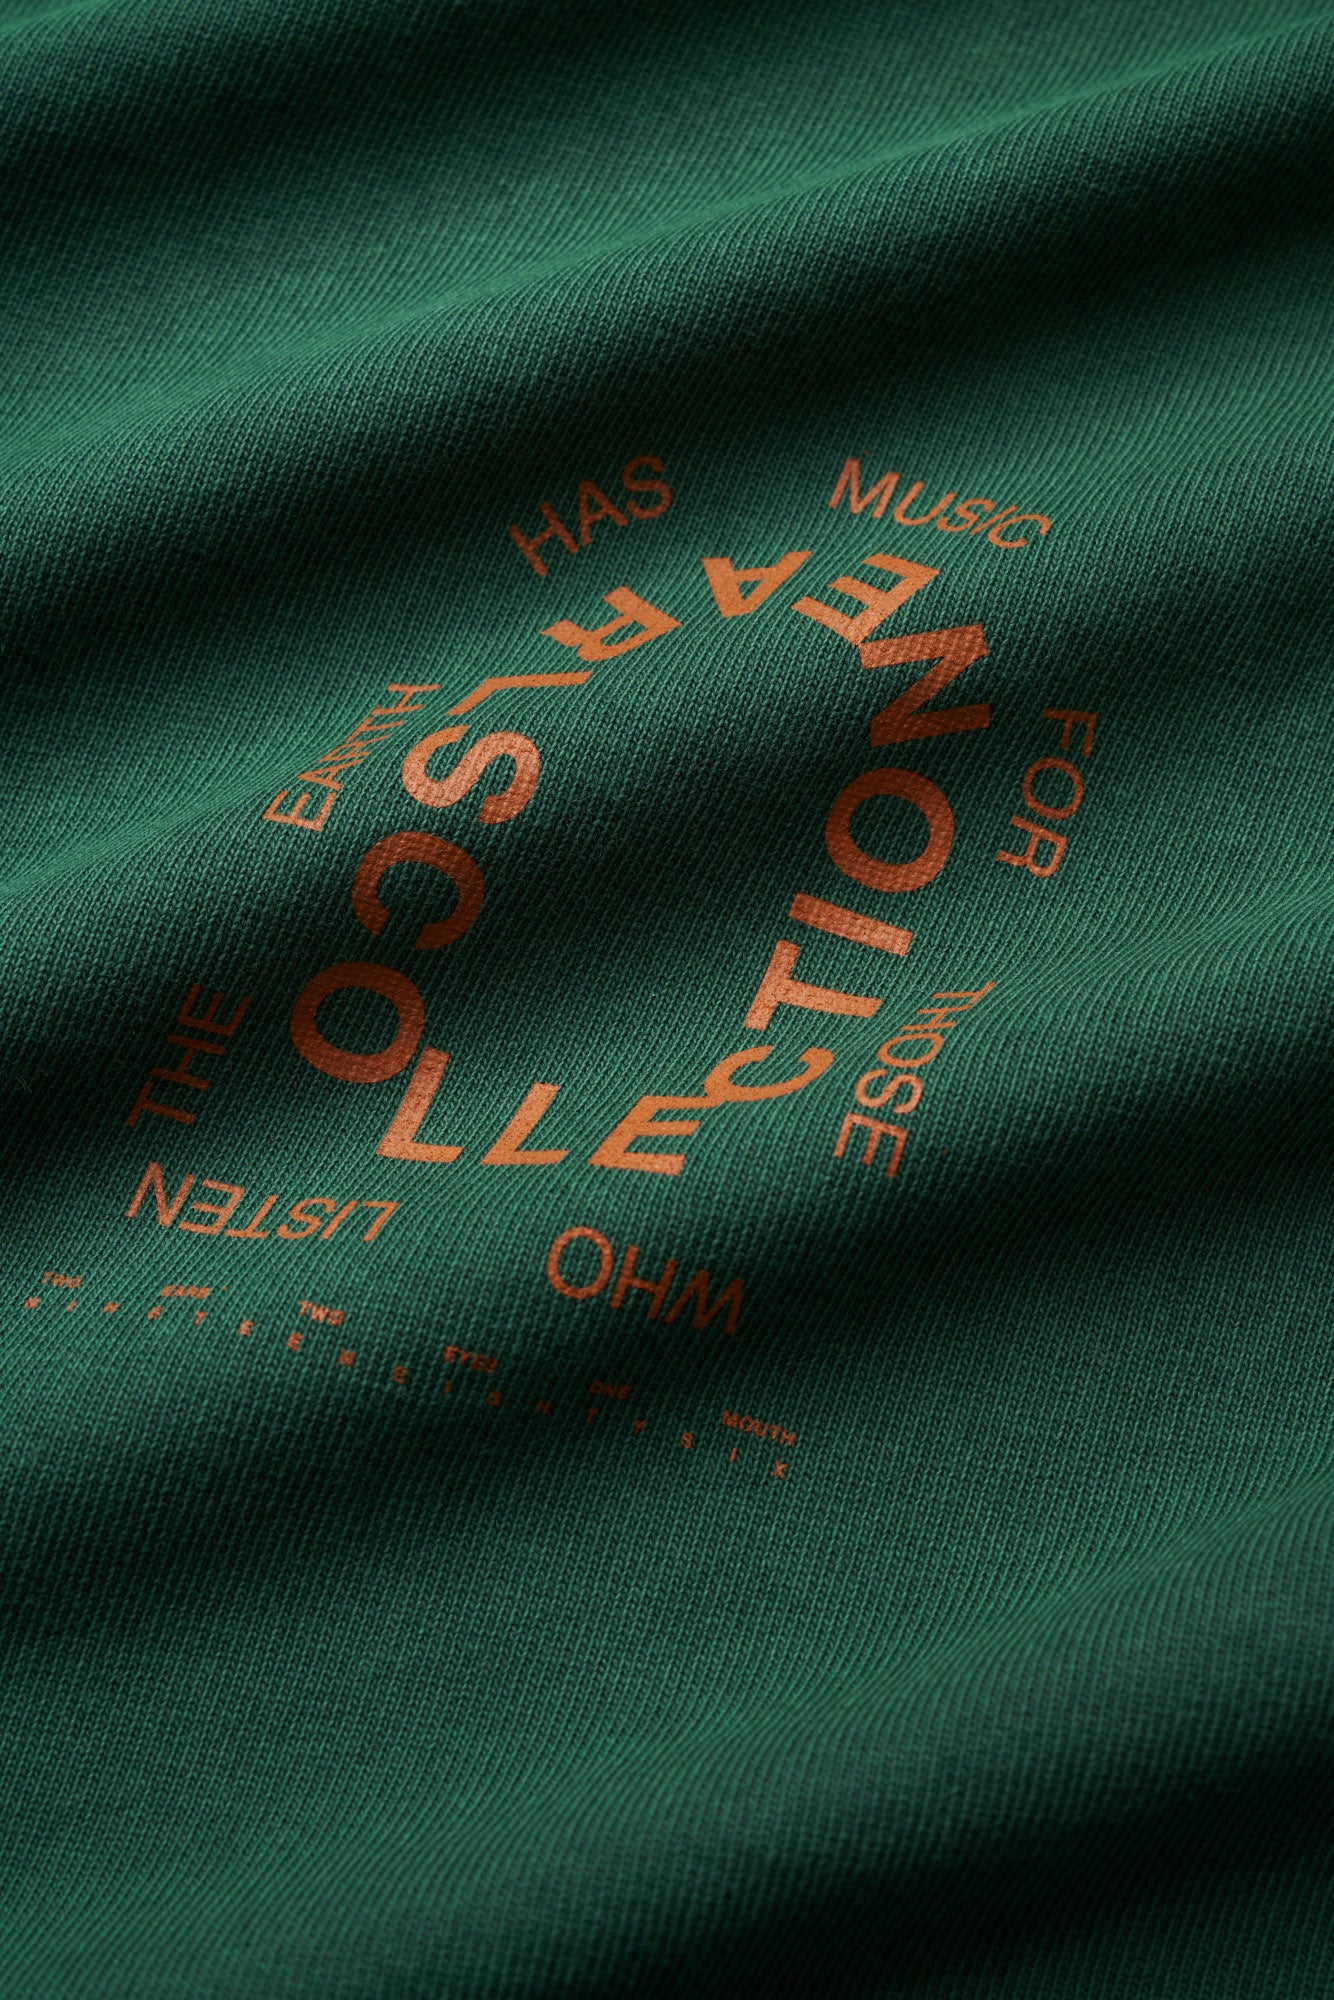 Earth & Music Heavy Tee - Forest Green